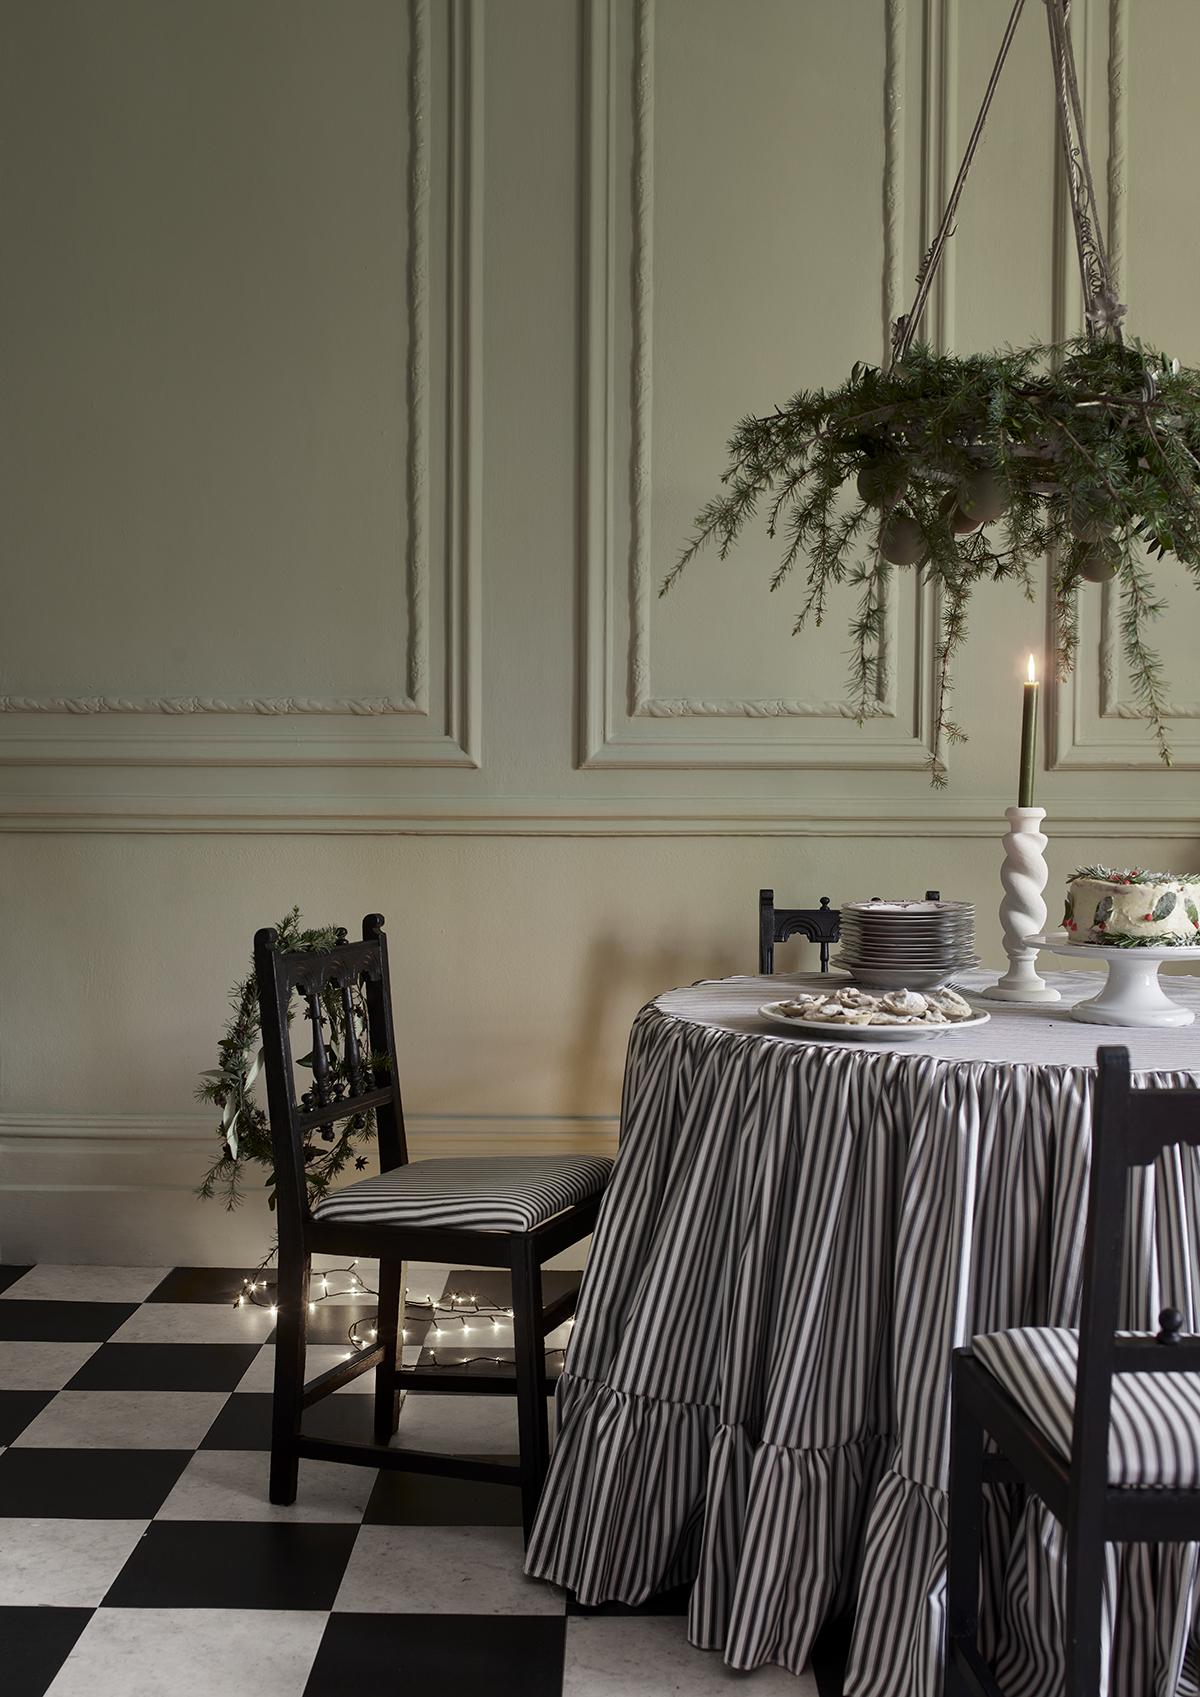 Annie Sloan Wall Paint Christmas dining room